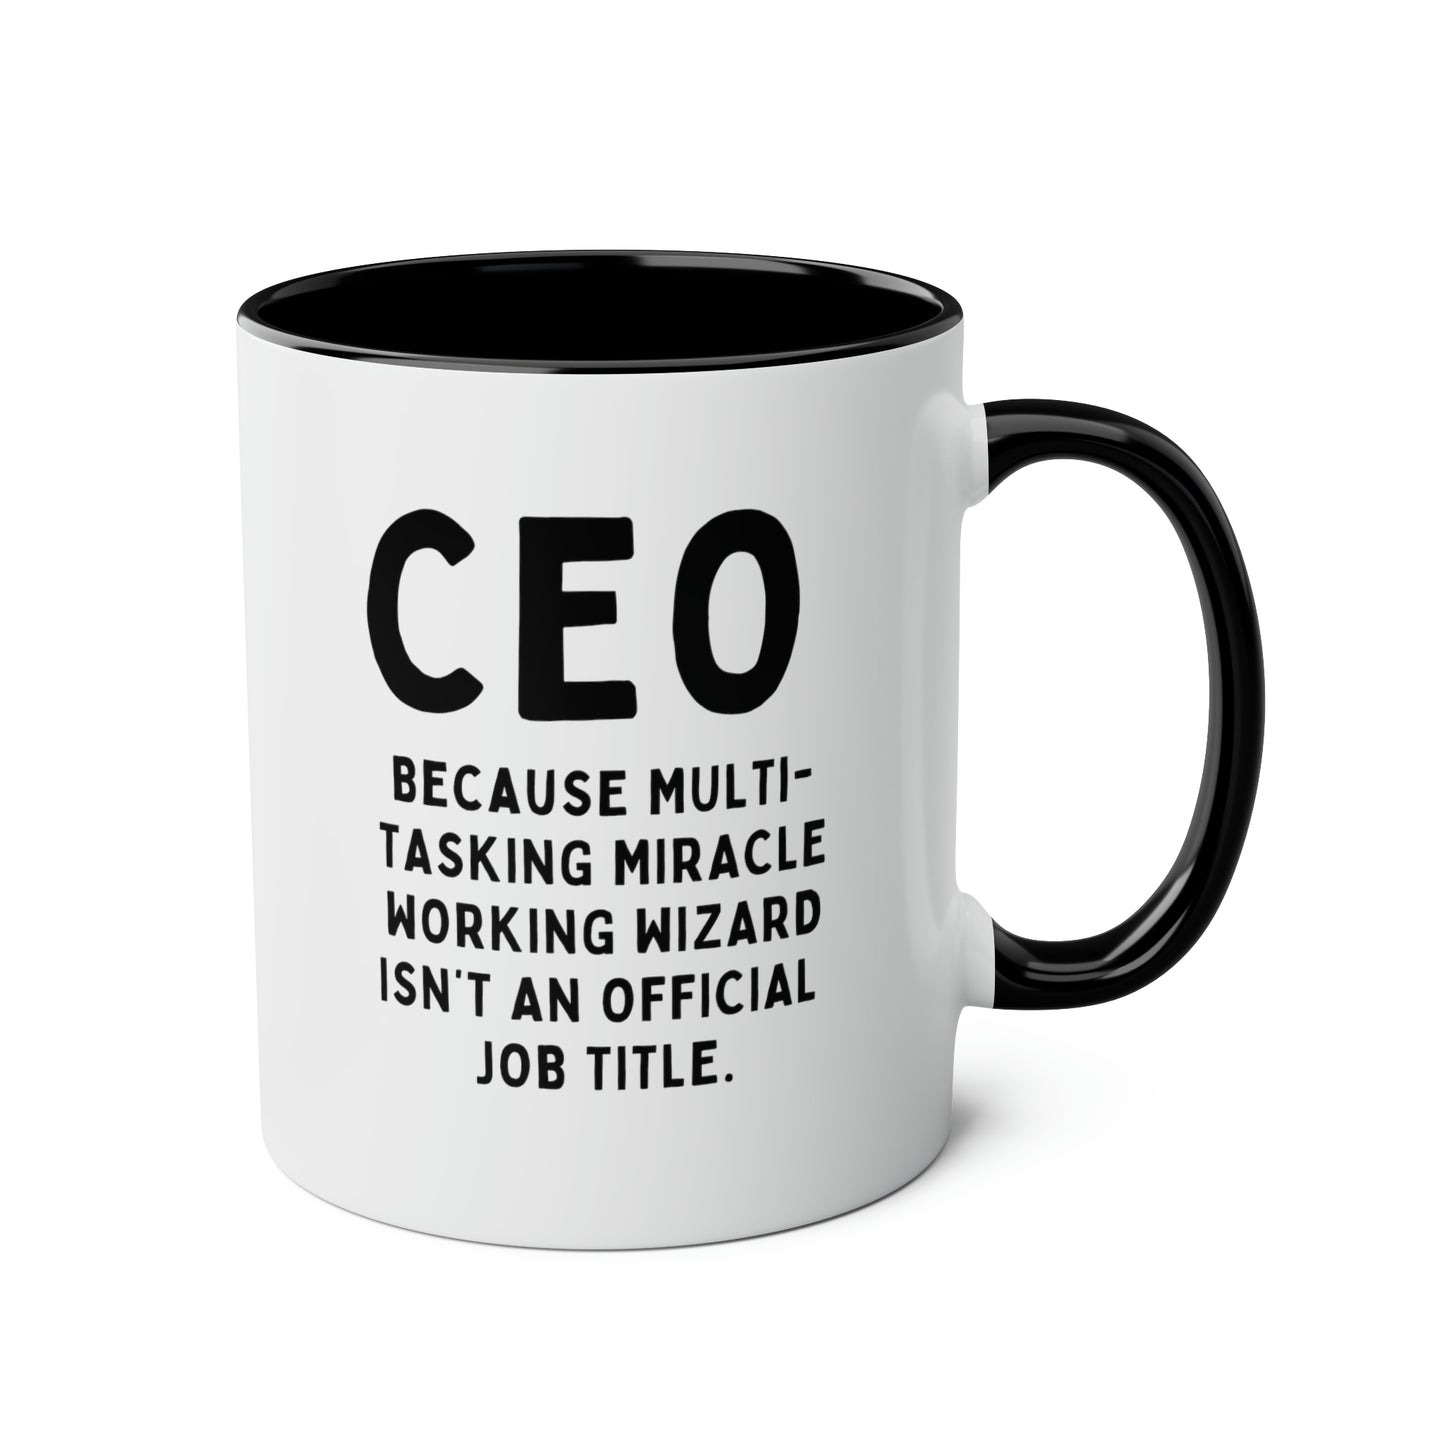 CEO Because Multi-tasking Miracle Working Wizard Isnt An Official Job Title 11oz white with black accent funny large coffee mug gift for boss job work office waveywares wavey wares wavywares wavy wares